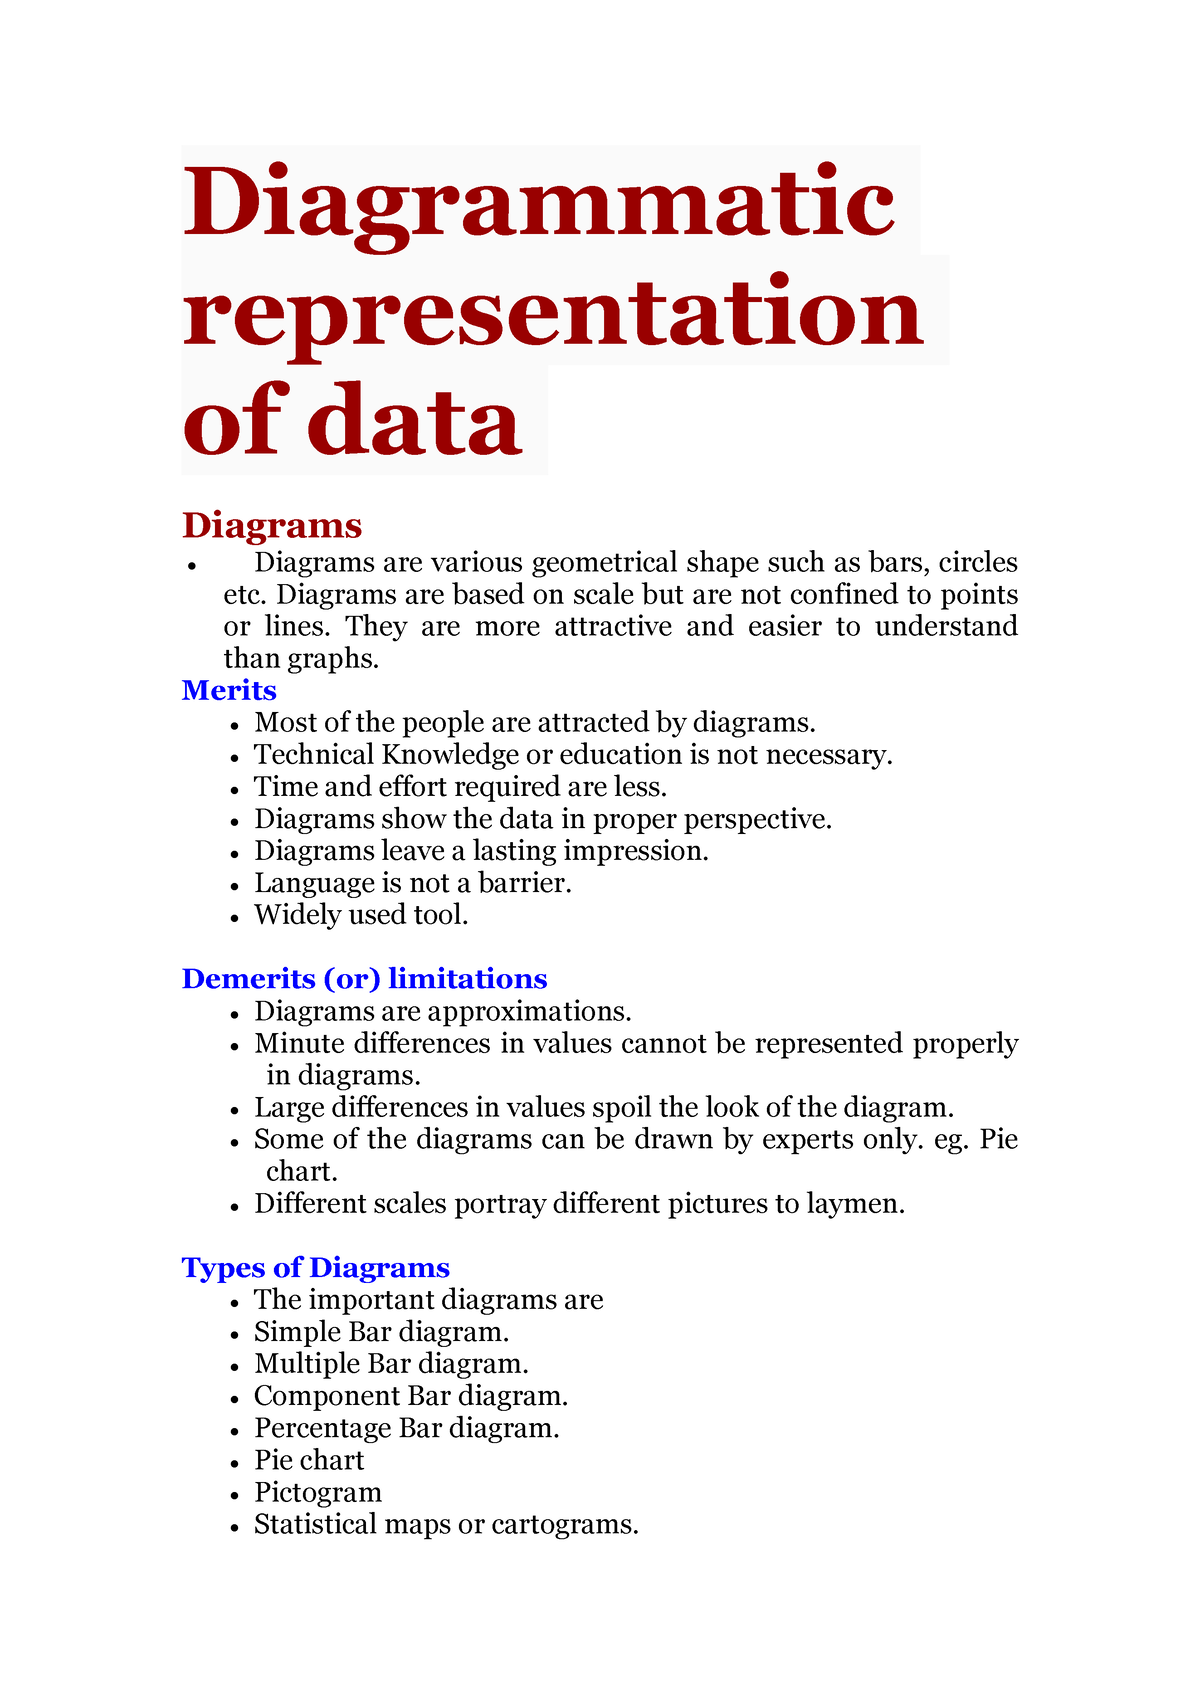 meaning of diagrammatic representation